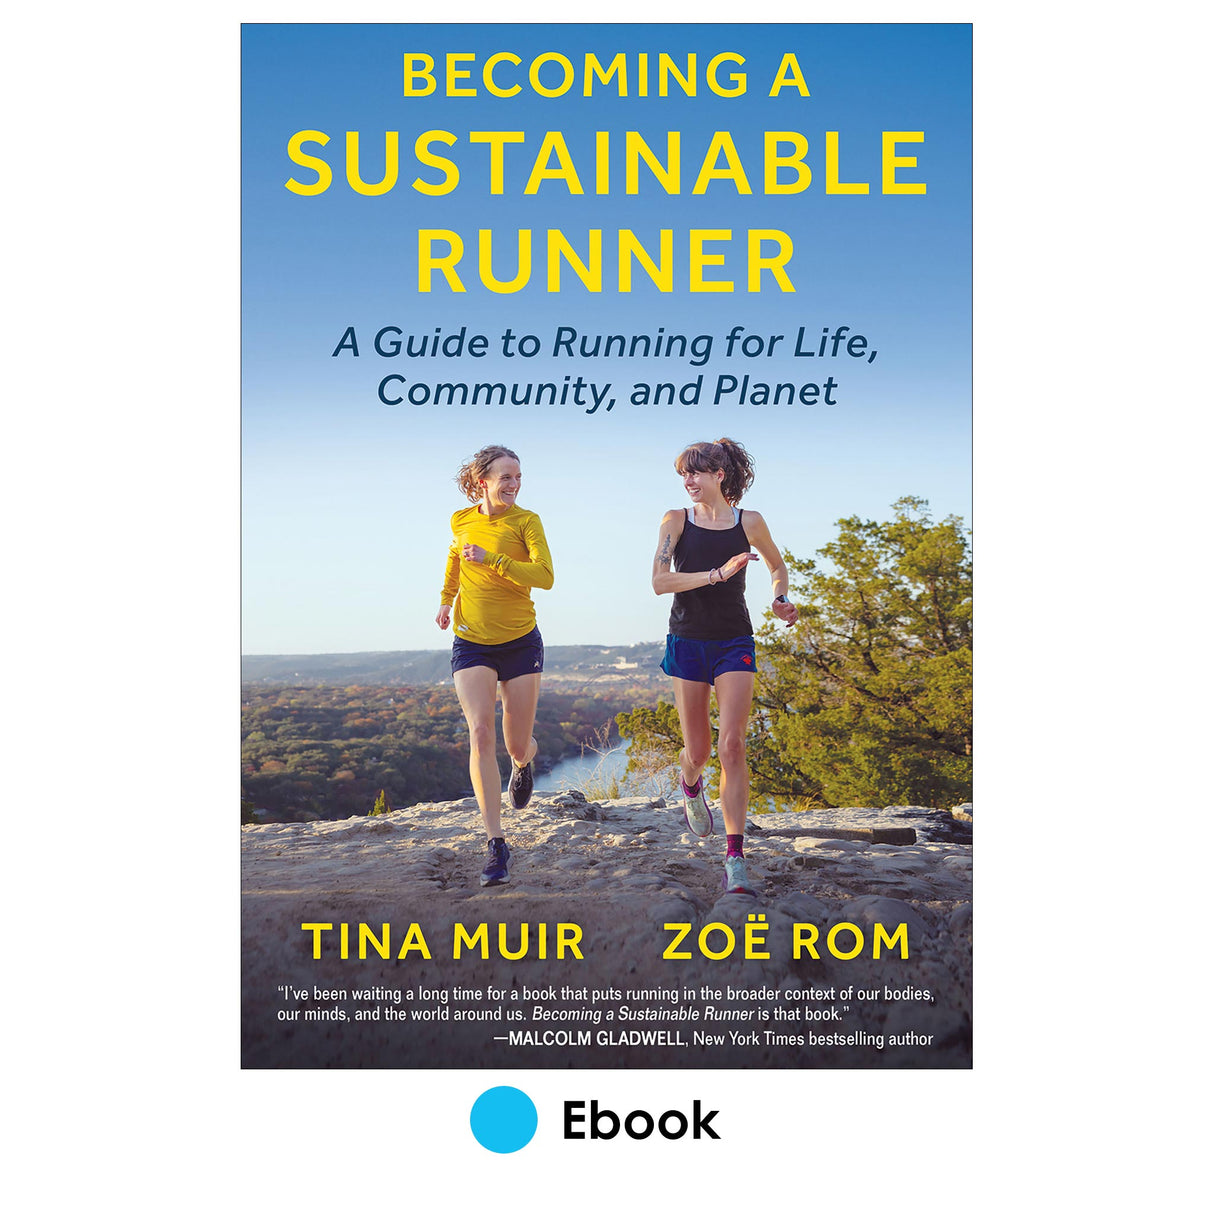 Becoming a Sustainable Runner epub